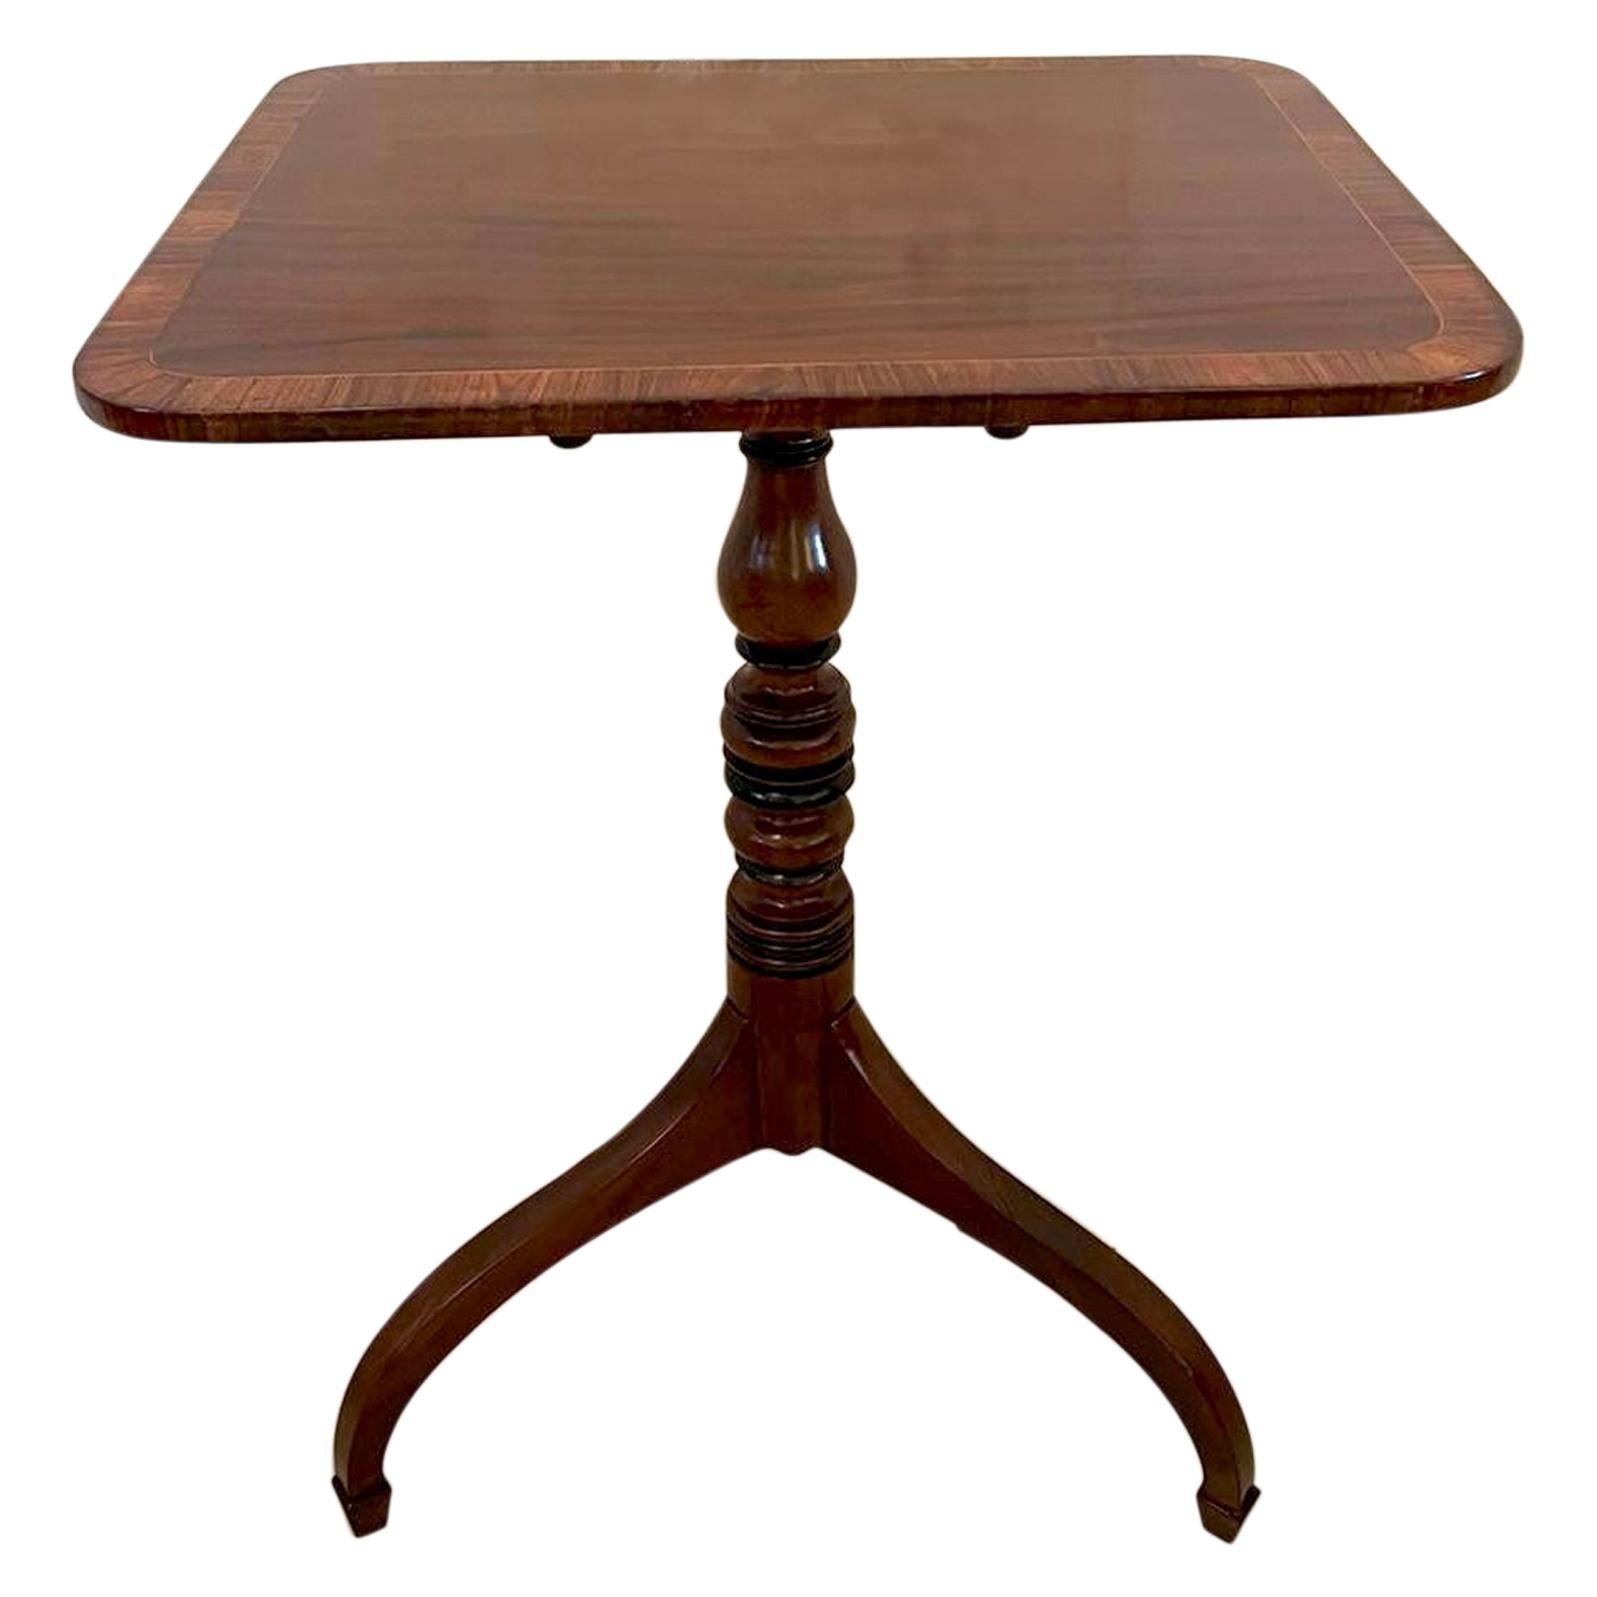 Antique 18th Century George III quality mahogany lamp table having a quality mahogany tilt top beautifully crossbanded in rosewood with a satinwood stringing. It is raised on a splendid turned shaped column and standing on unusual and very